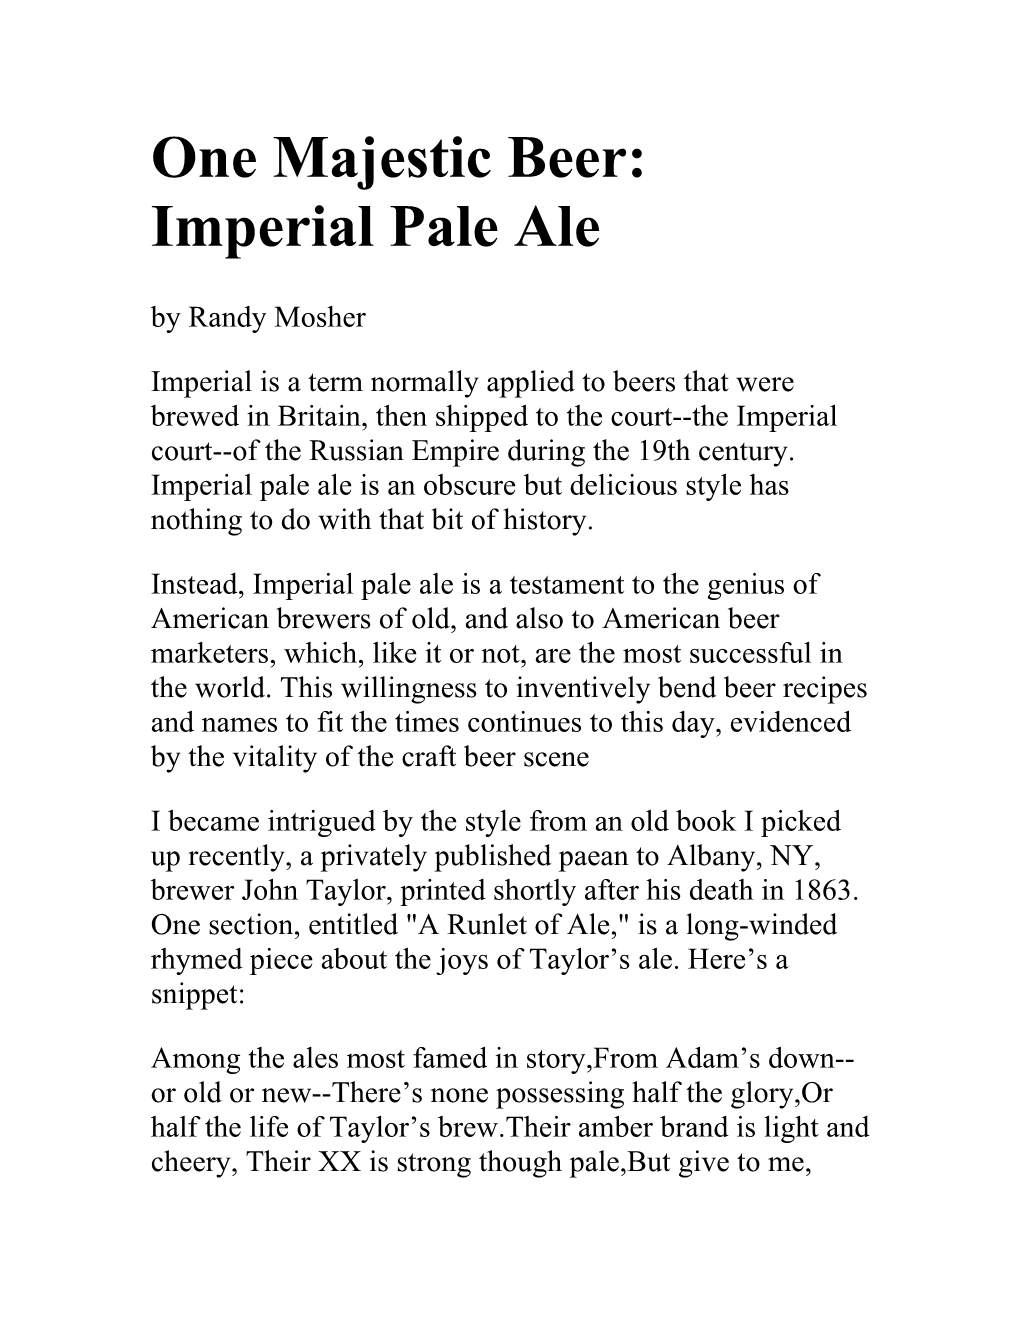 One Majestic Beer: Imperial Pale Ale